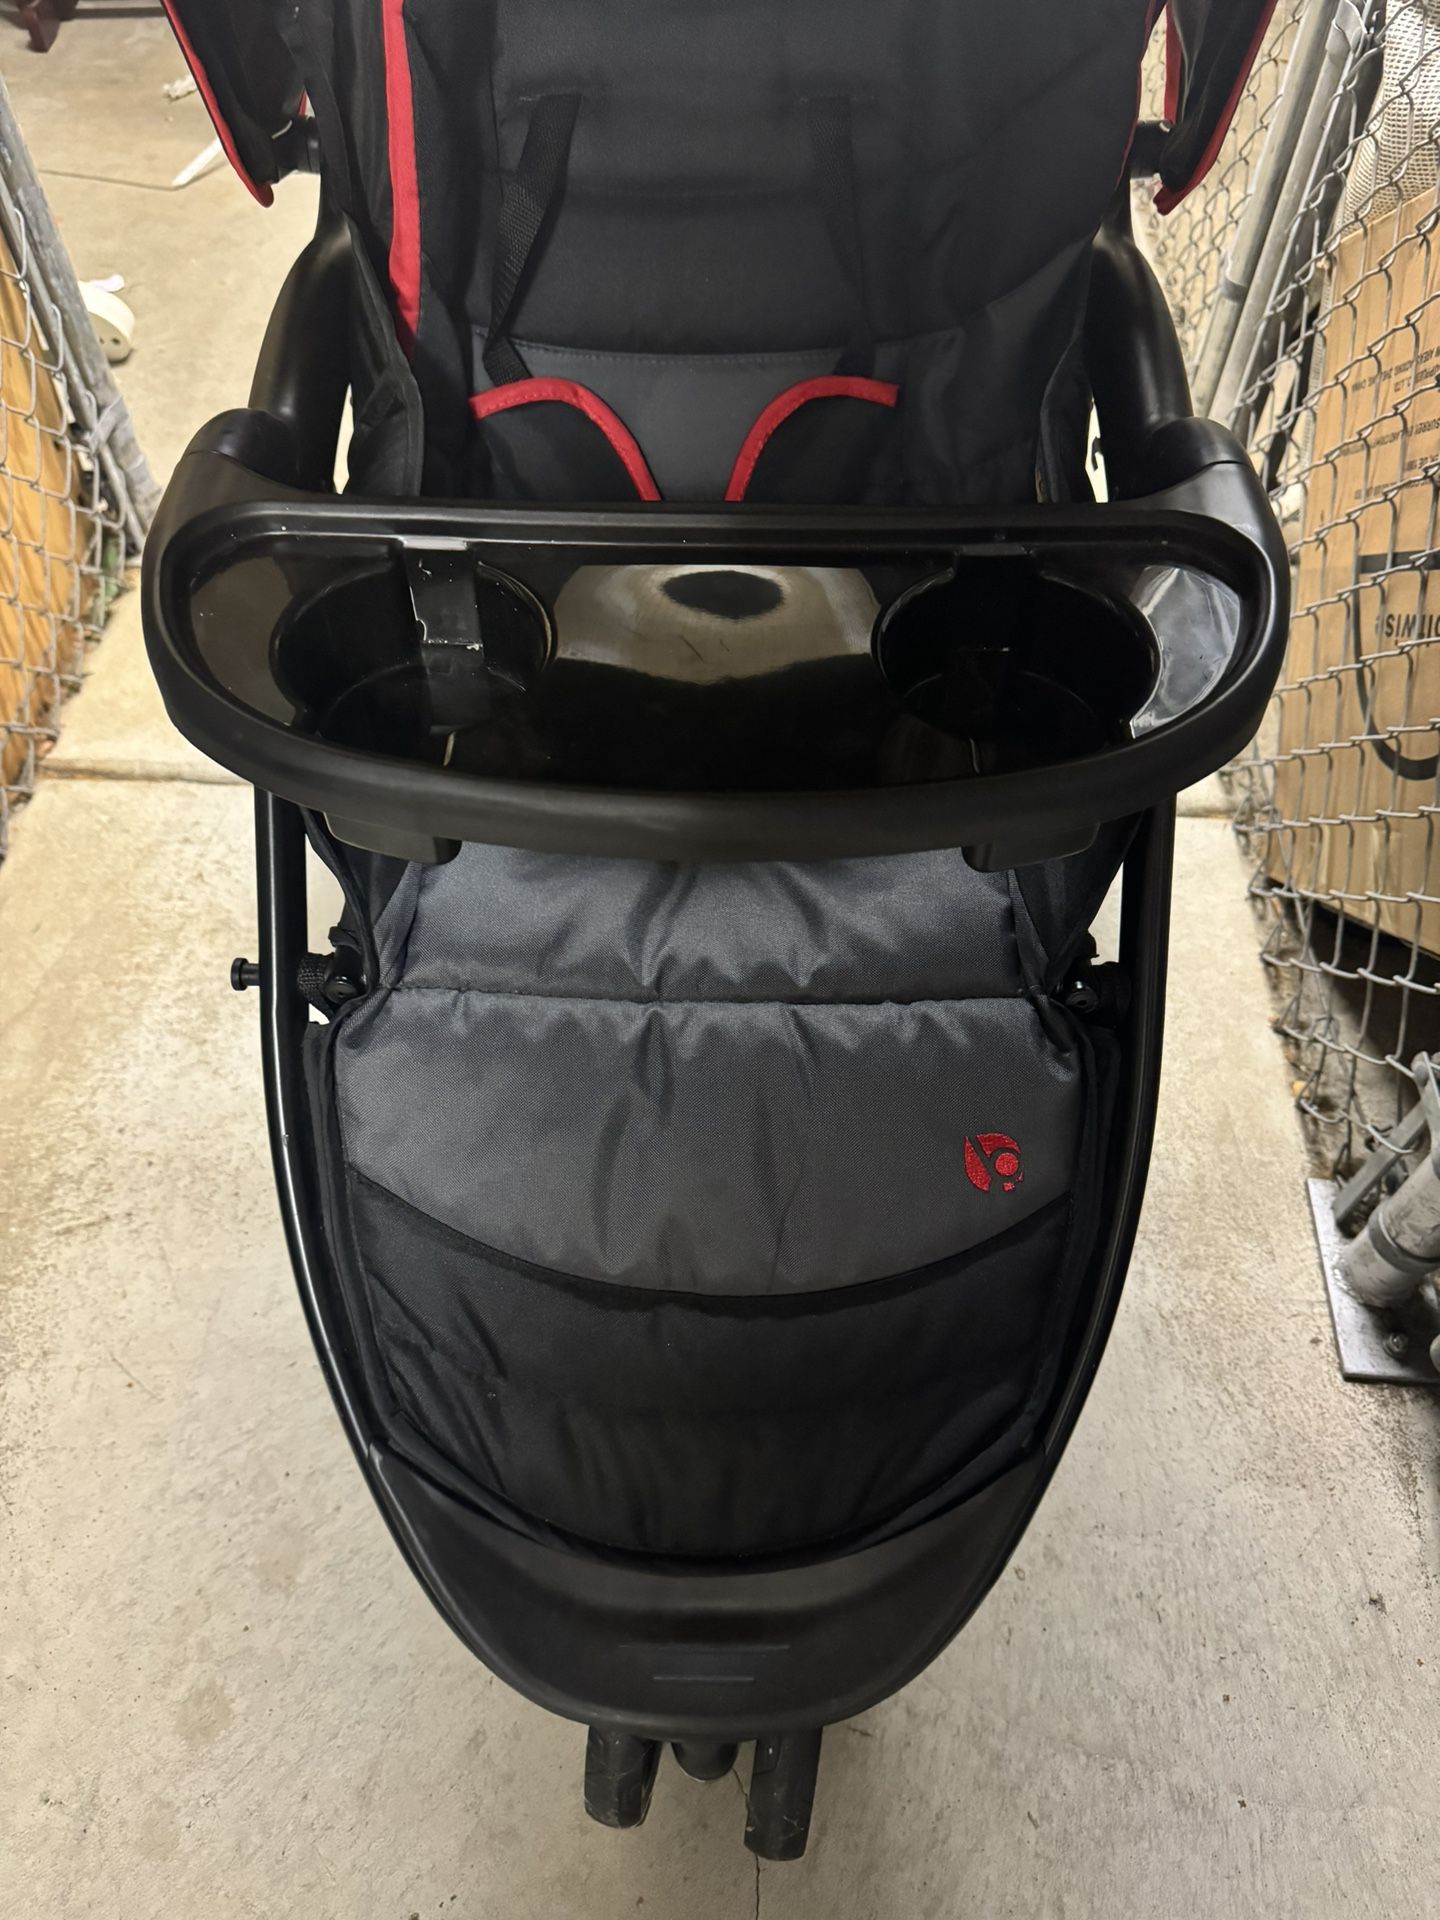 Infant Carseat With Stroller